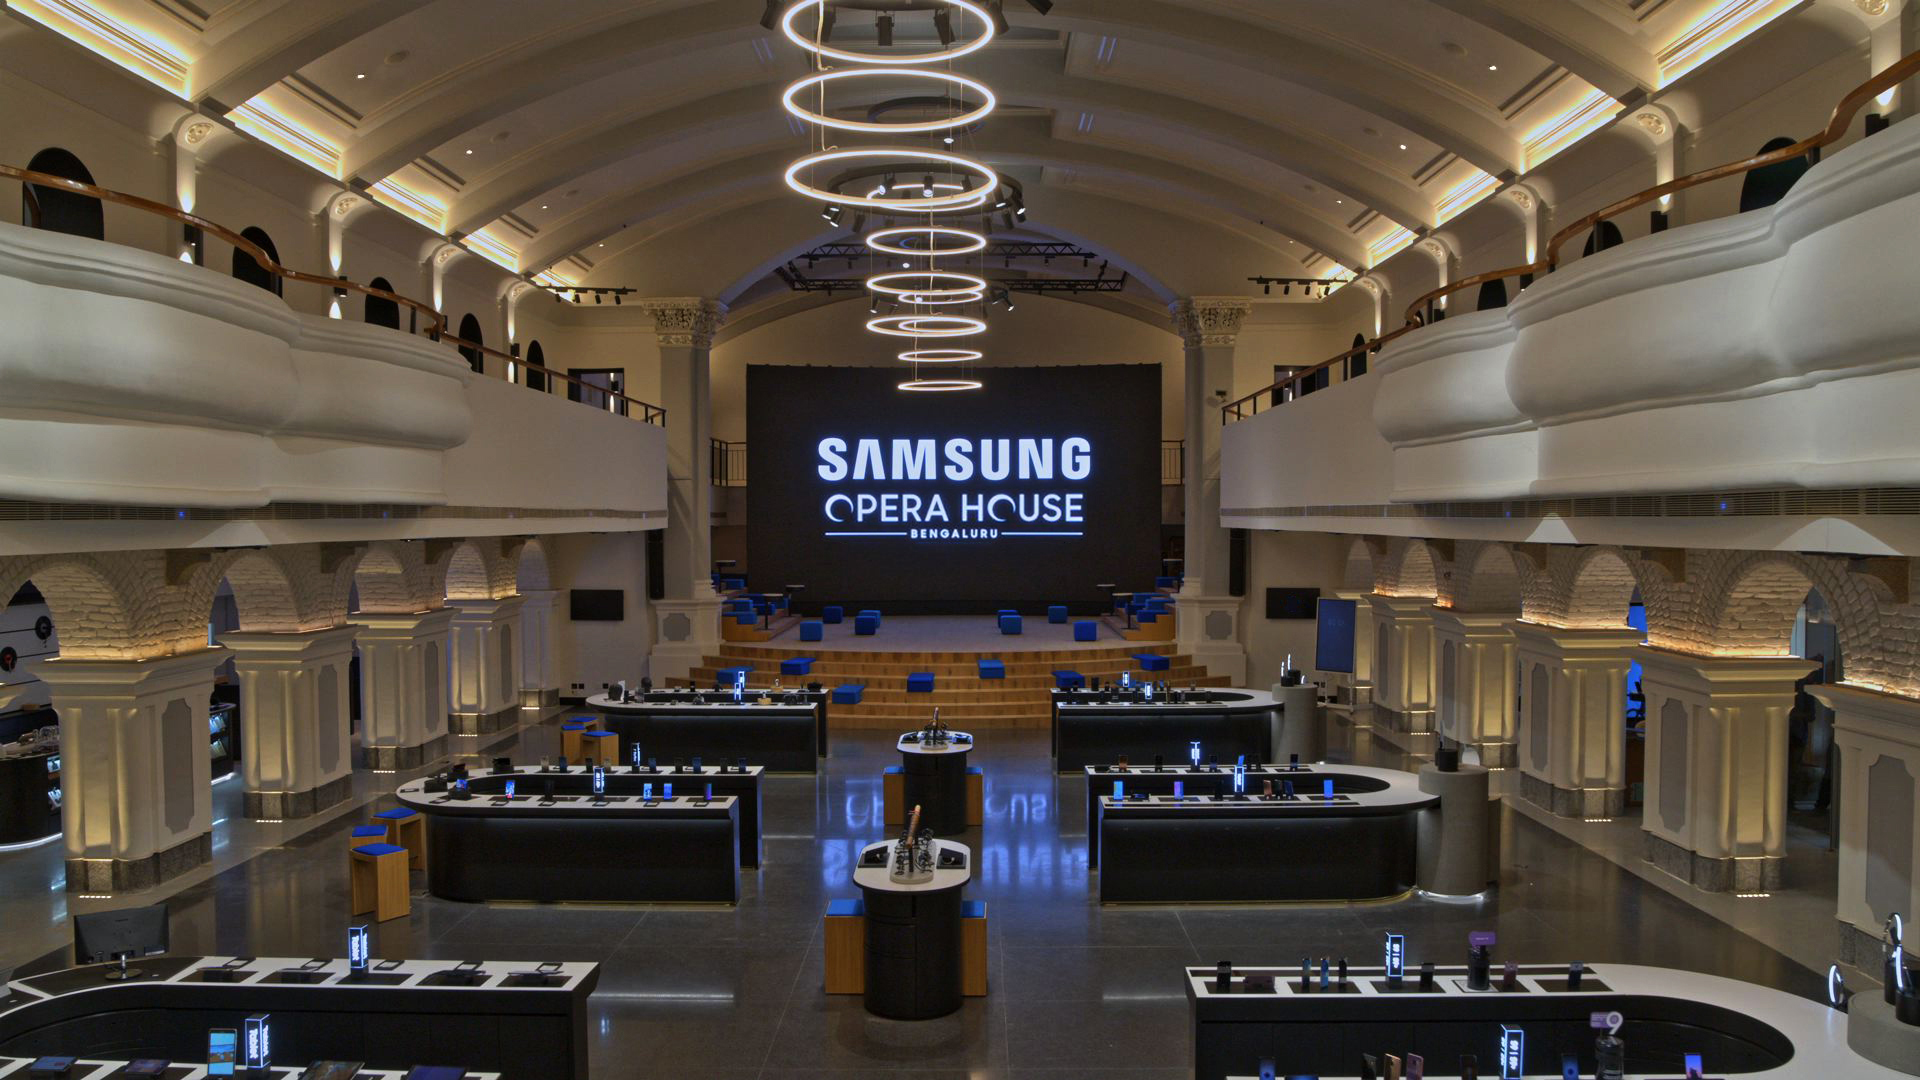 Samsung's Opera House store in Bengaluru, India is dubbed the world's largest mobile experience center. (Photo Courtesy: Samsung)